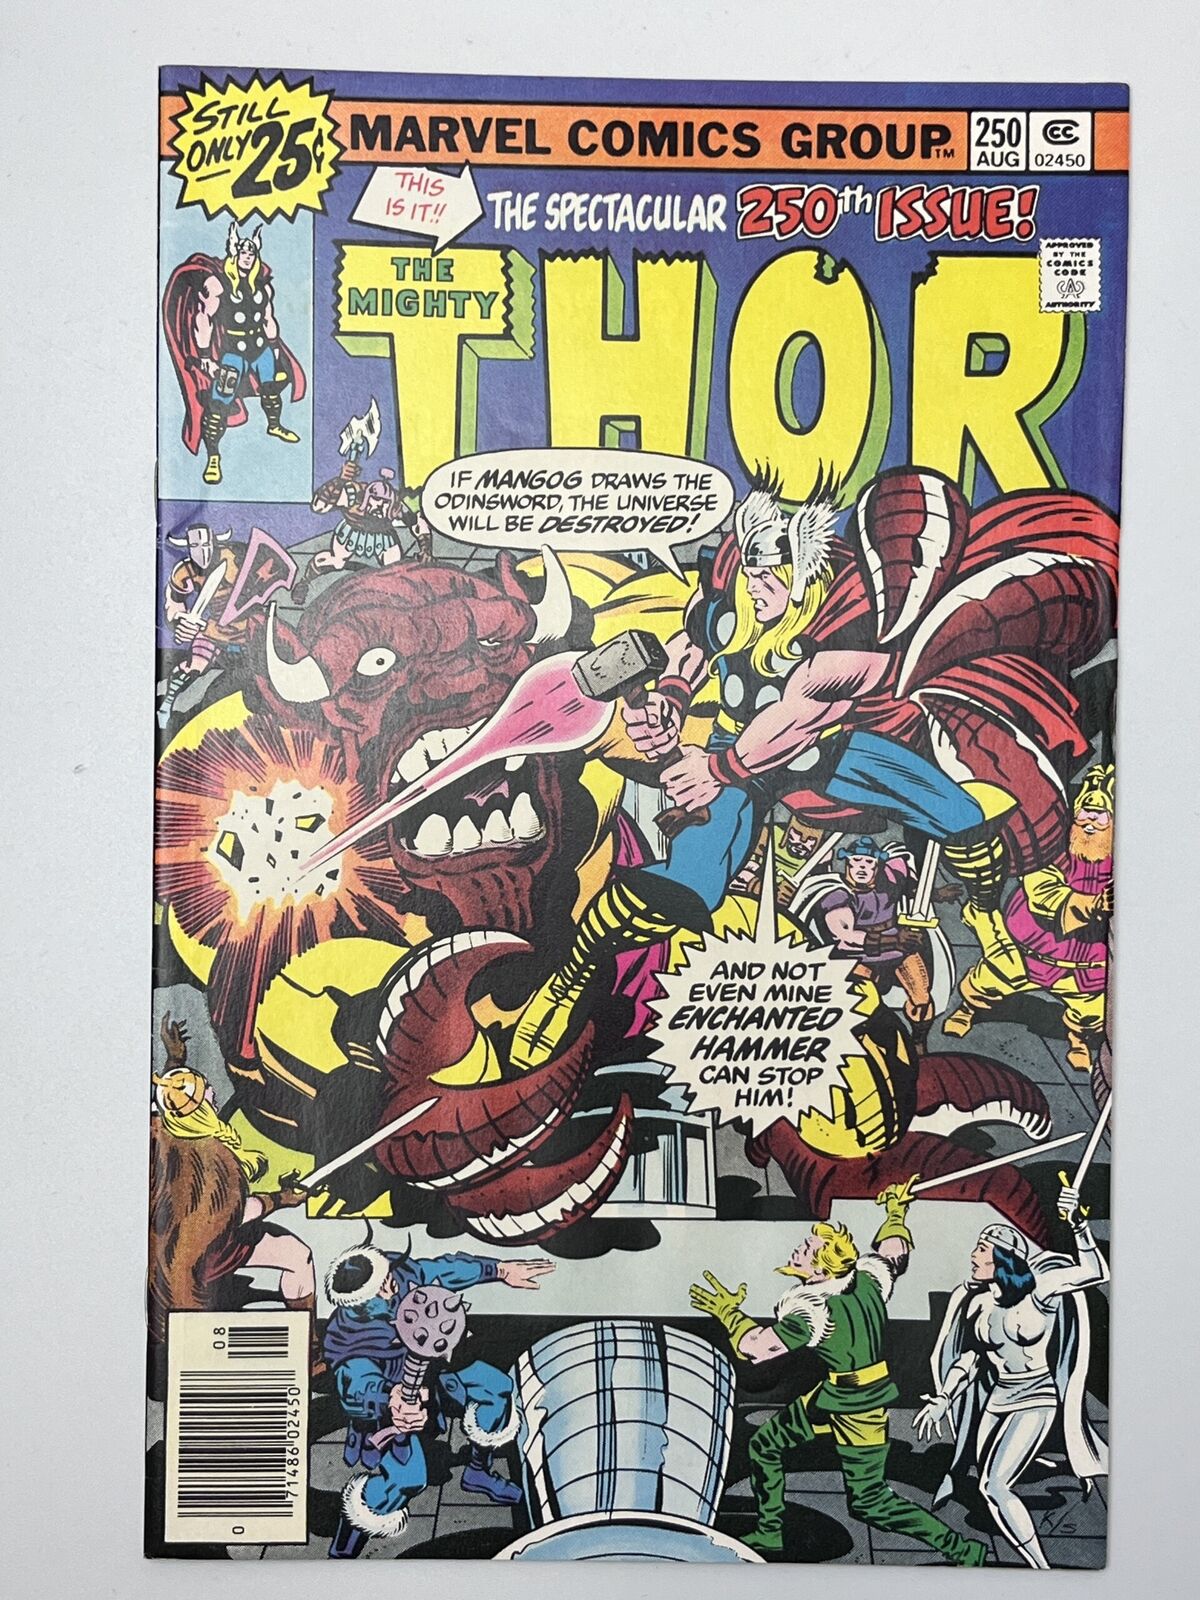 Thor #250 (1976) in 8.5 Very Fine+